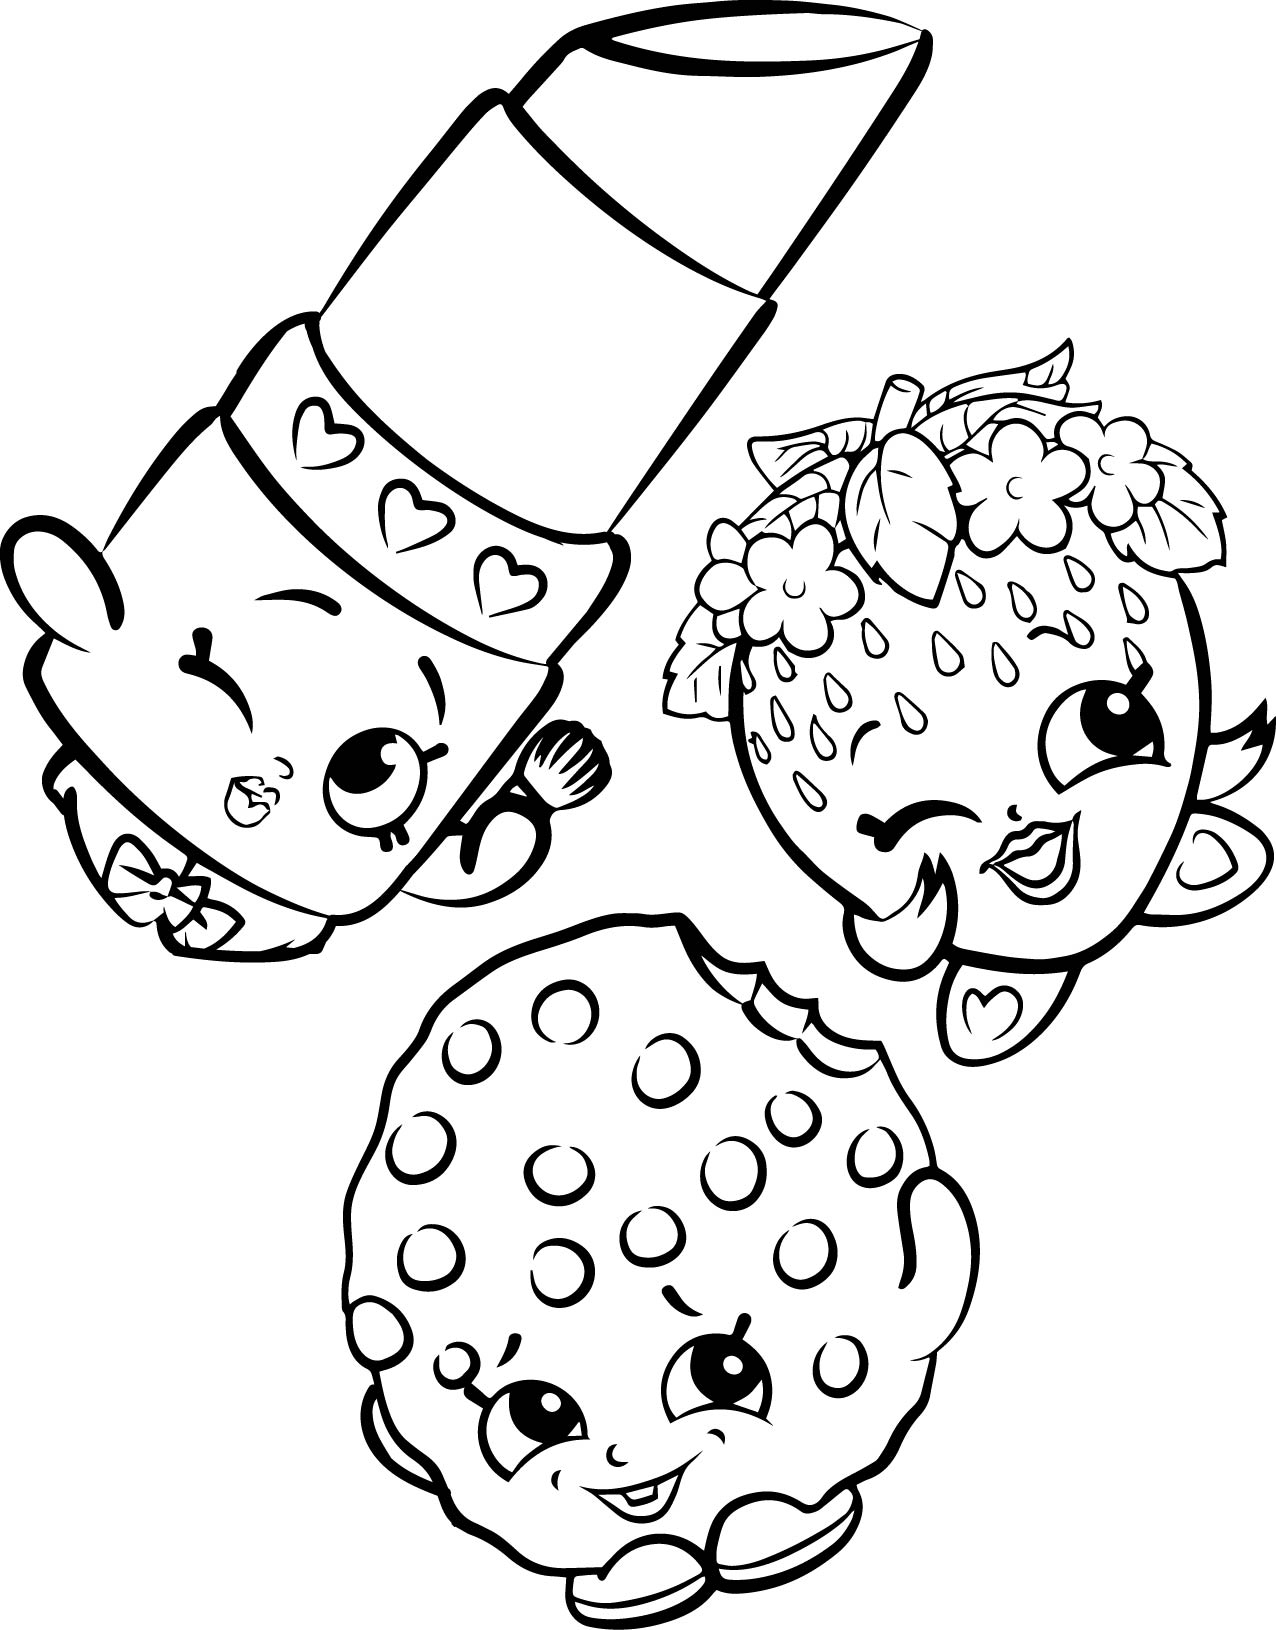 Shopkins Logo Coloring Pages at GetDrawings | Free download